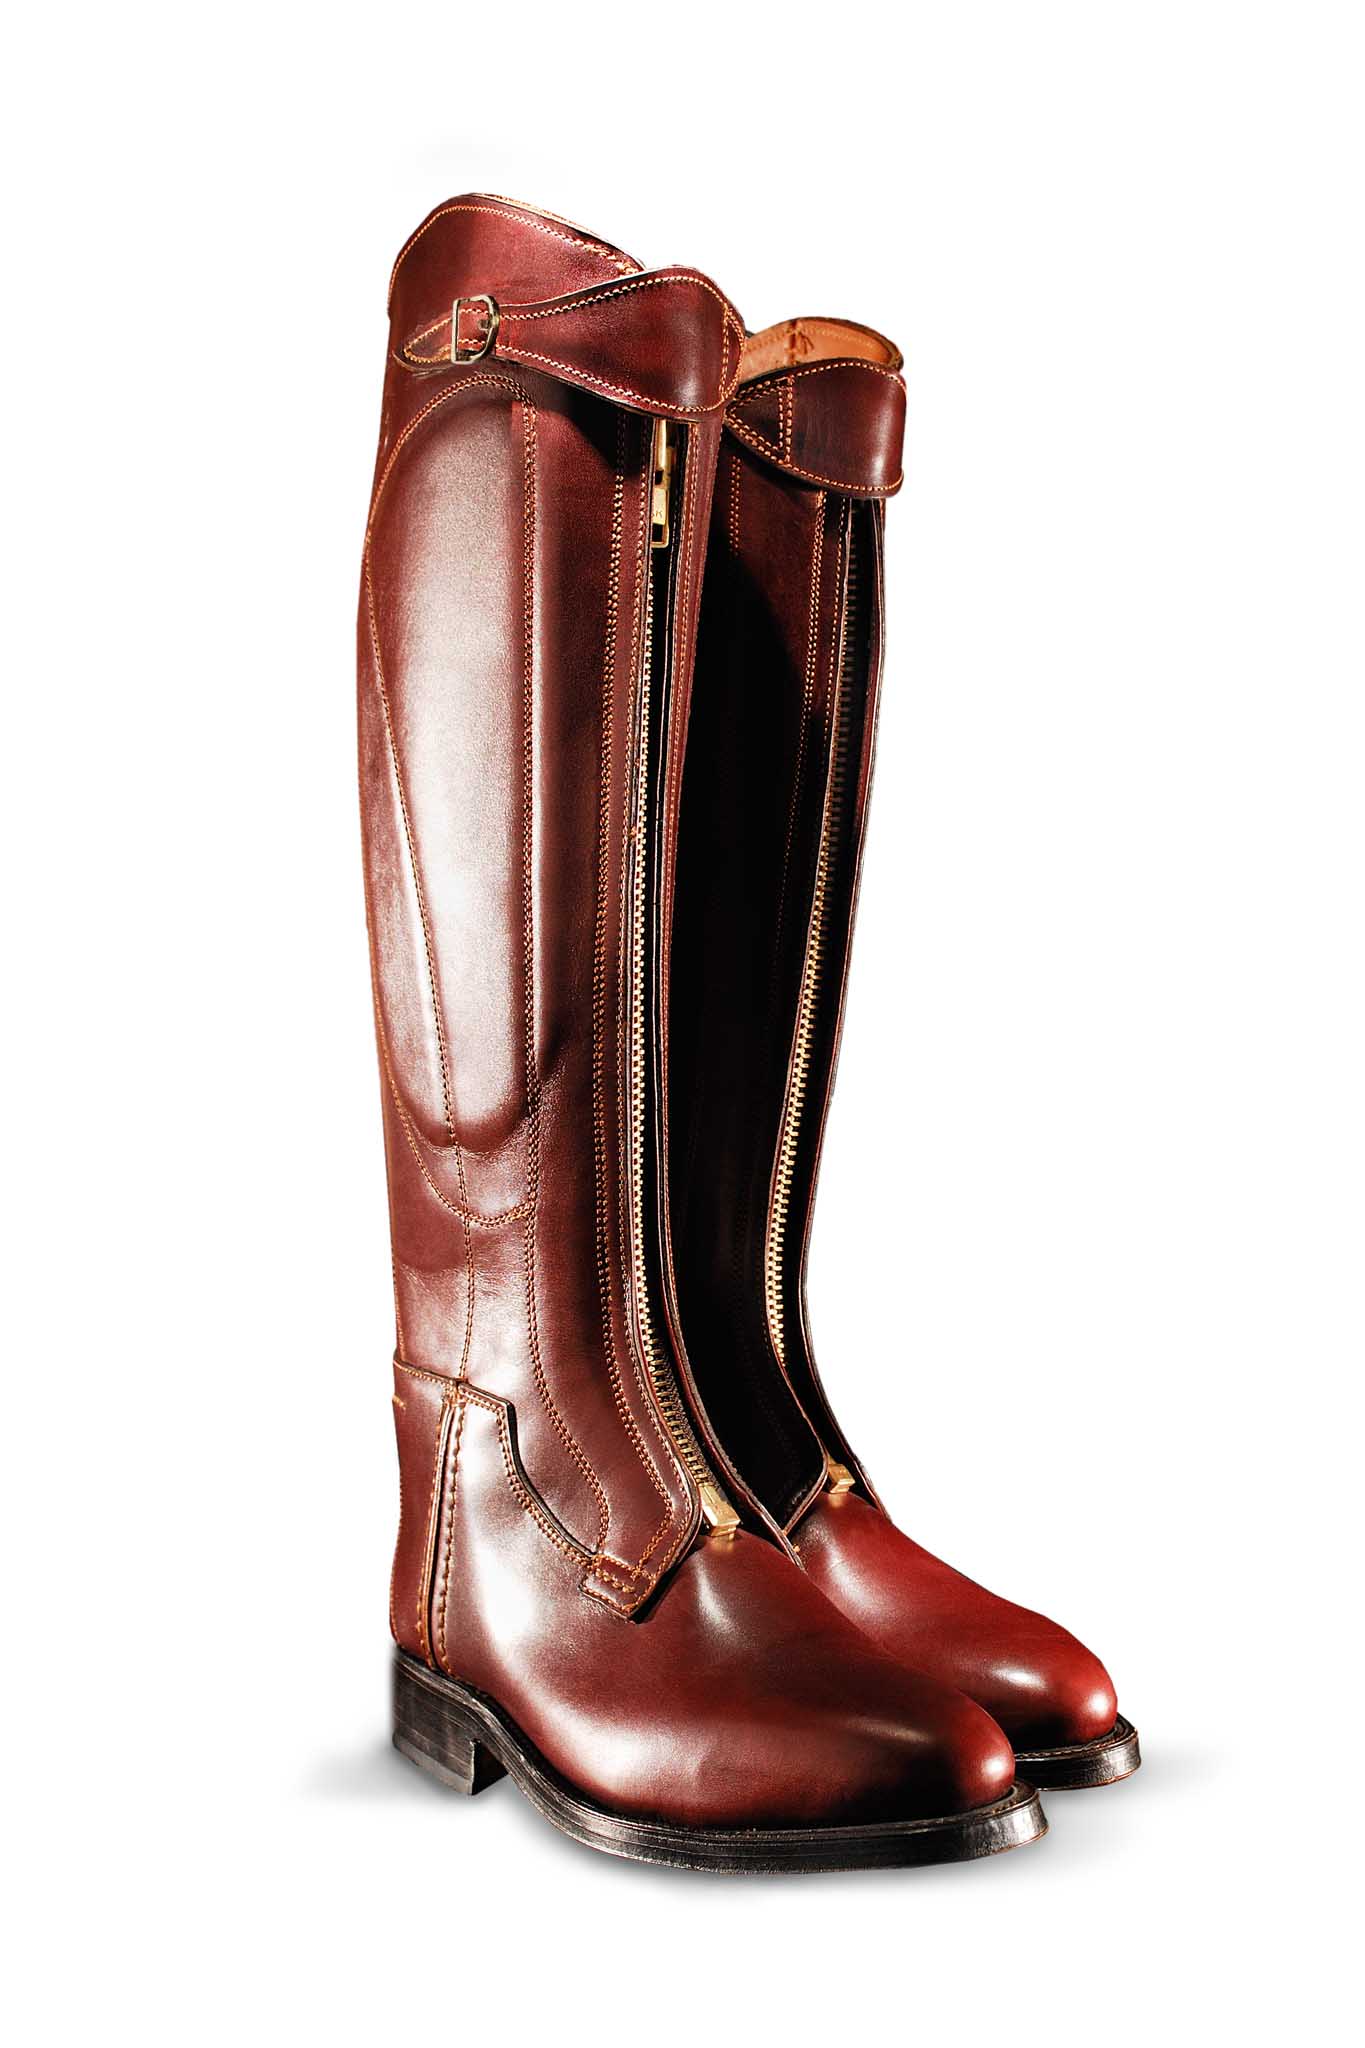 Custom Made D3O 3 Layer Boots (Tobacco)